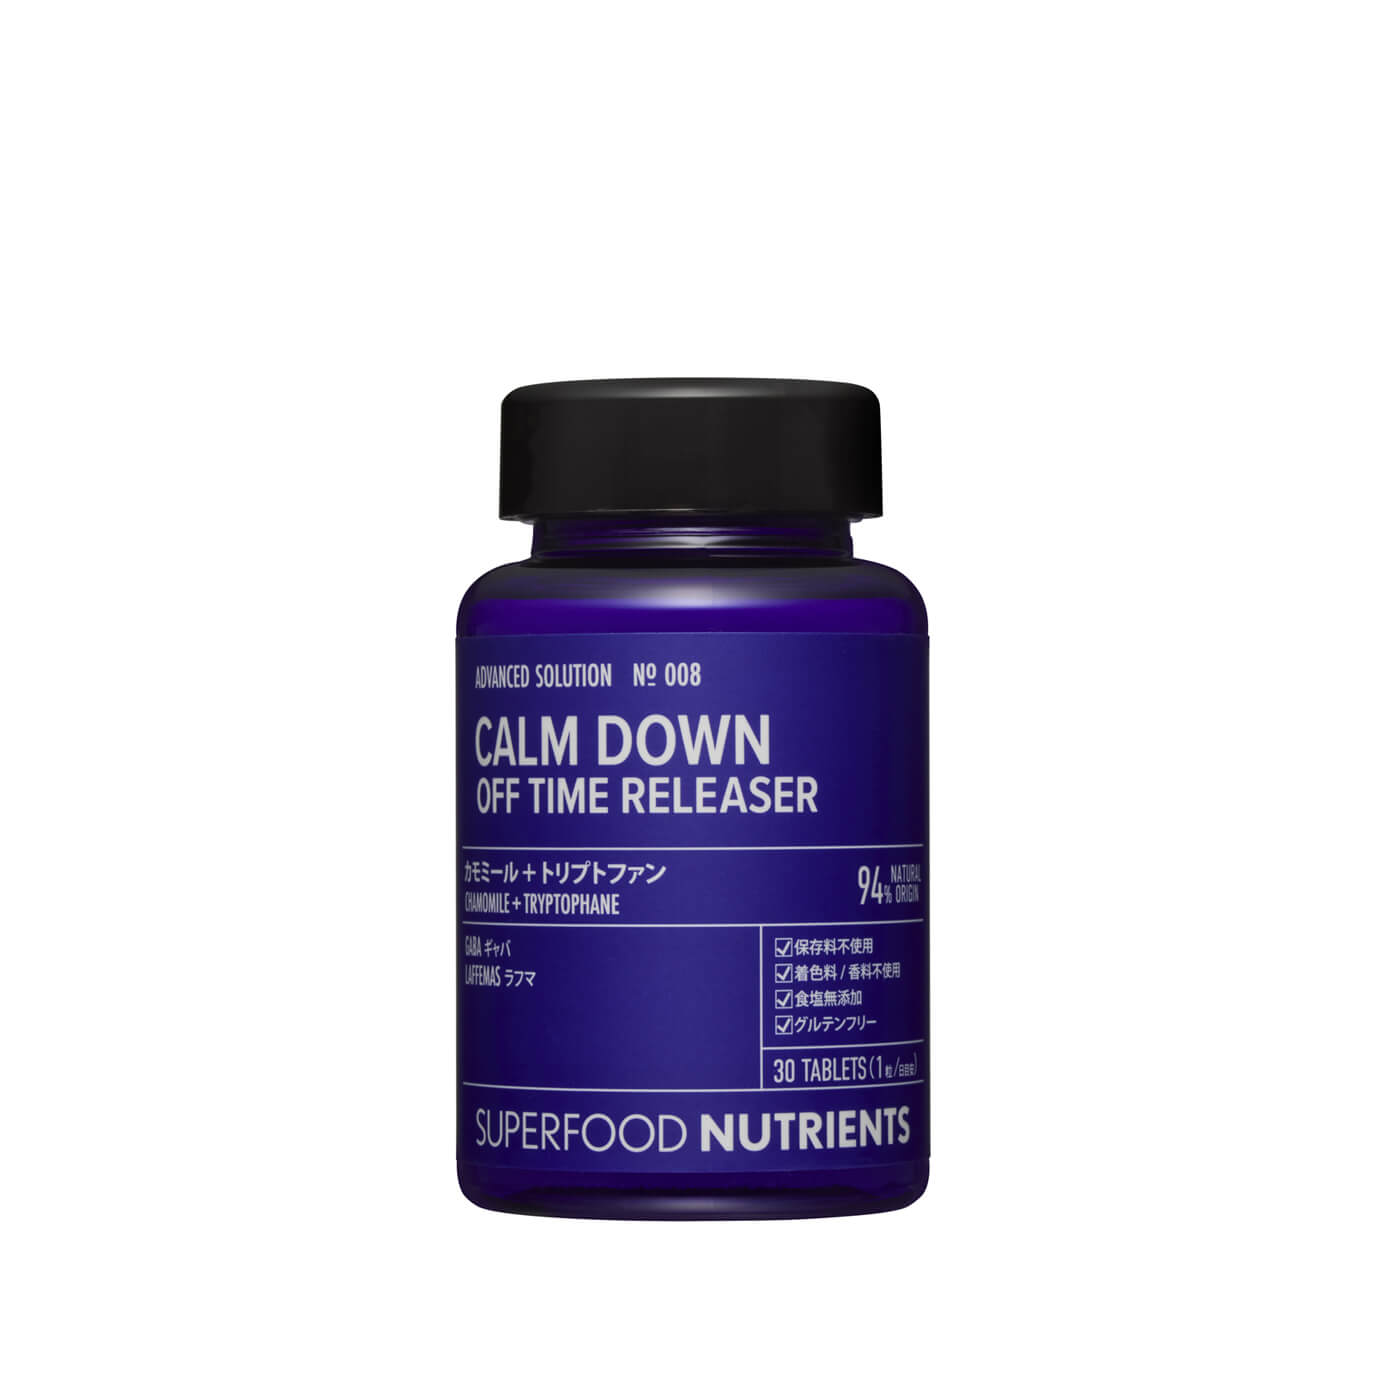 SUPERFOOD NUTRIENTS No.008 / CALM DOWN
